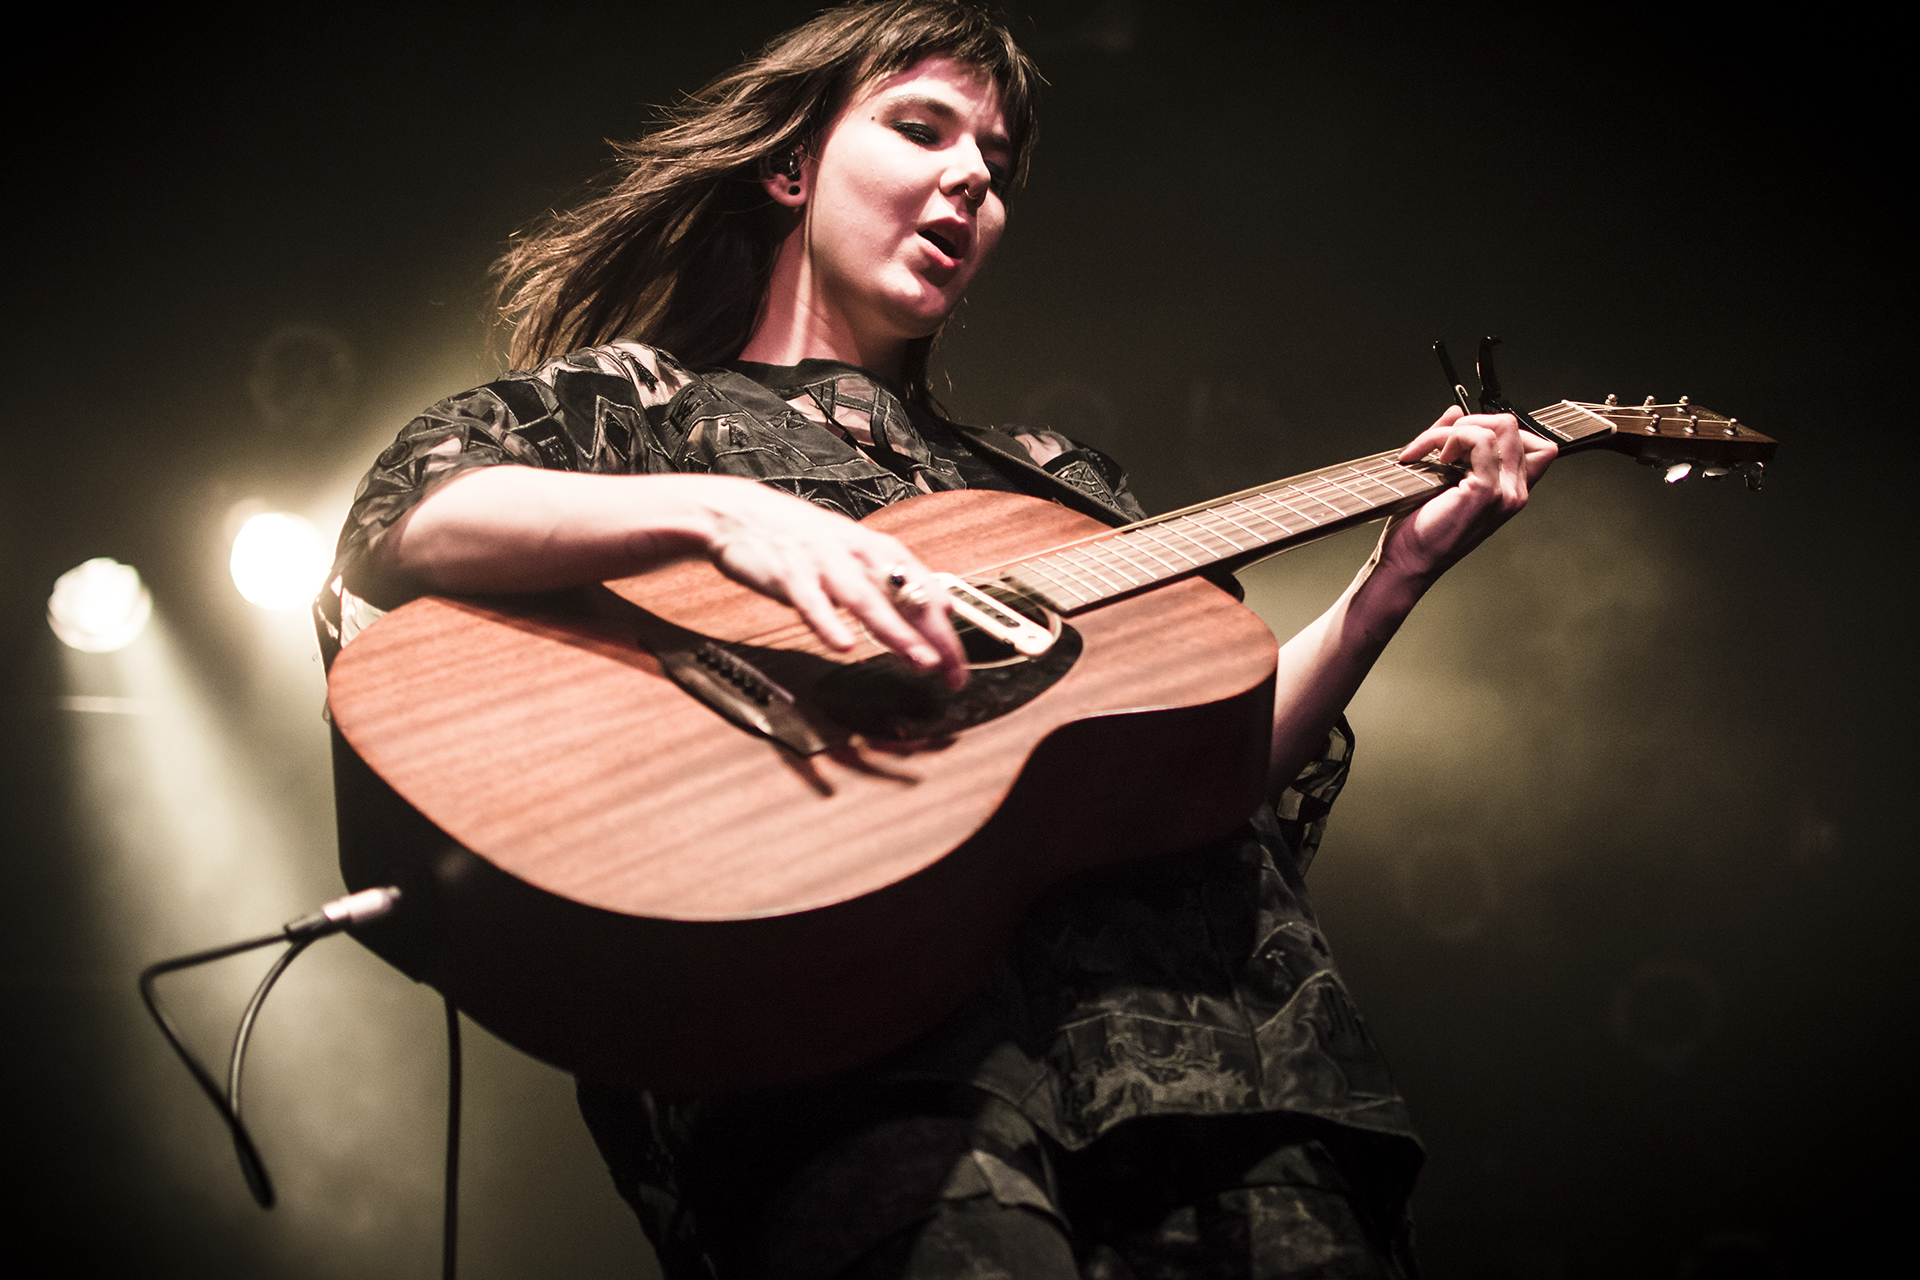 Of-Monsters-And-Men-Niceto-Club-16-Marzo-2016-Lucia-de-la-Torre-Indie-Hoy-9